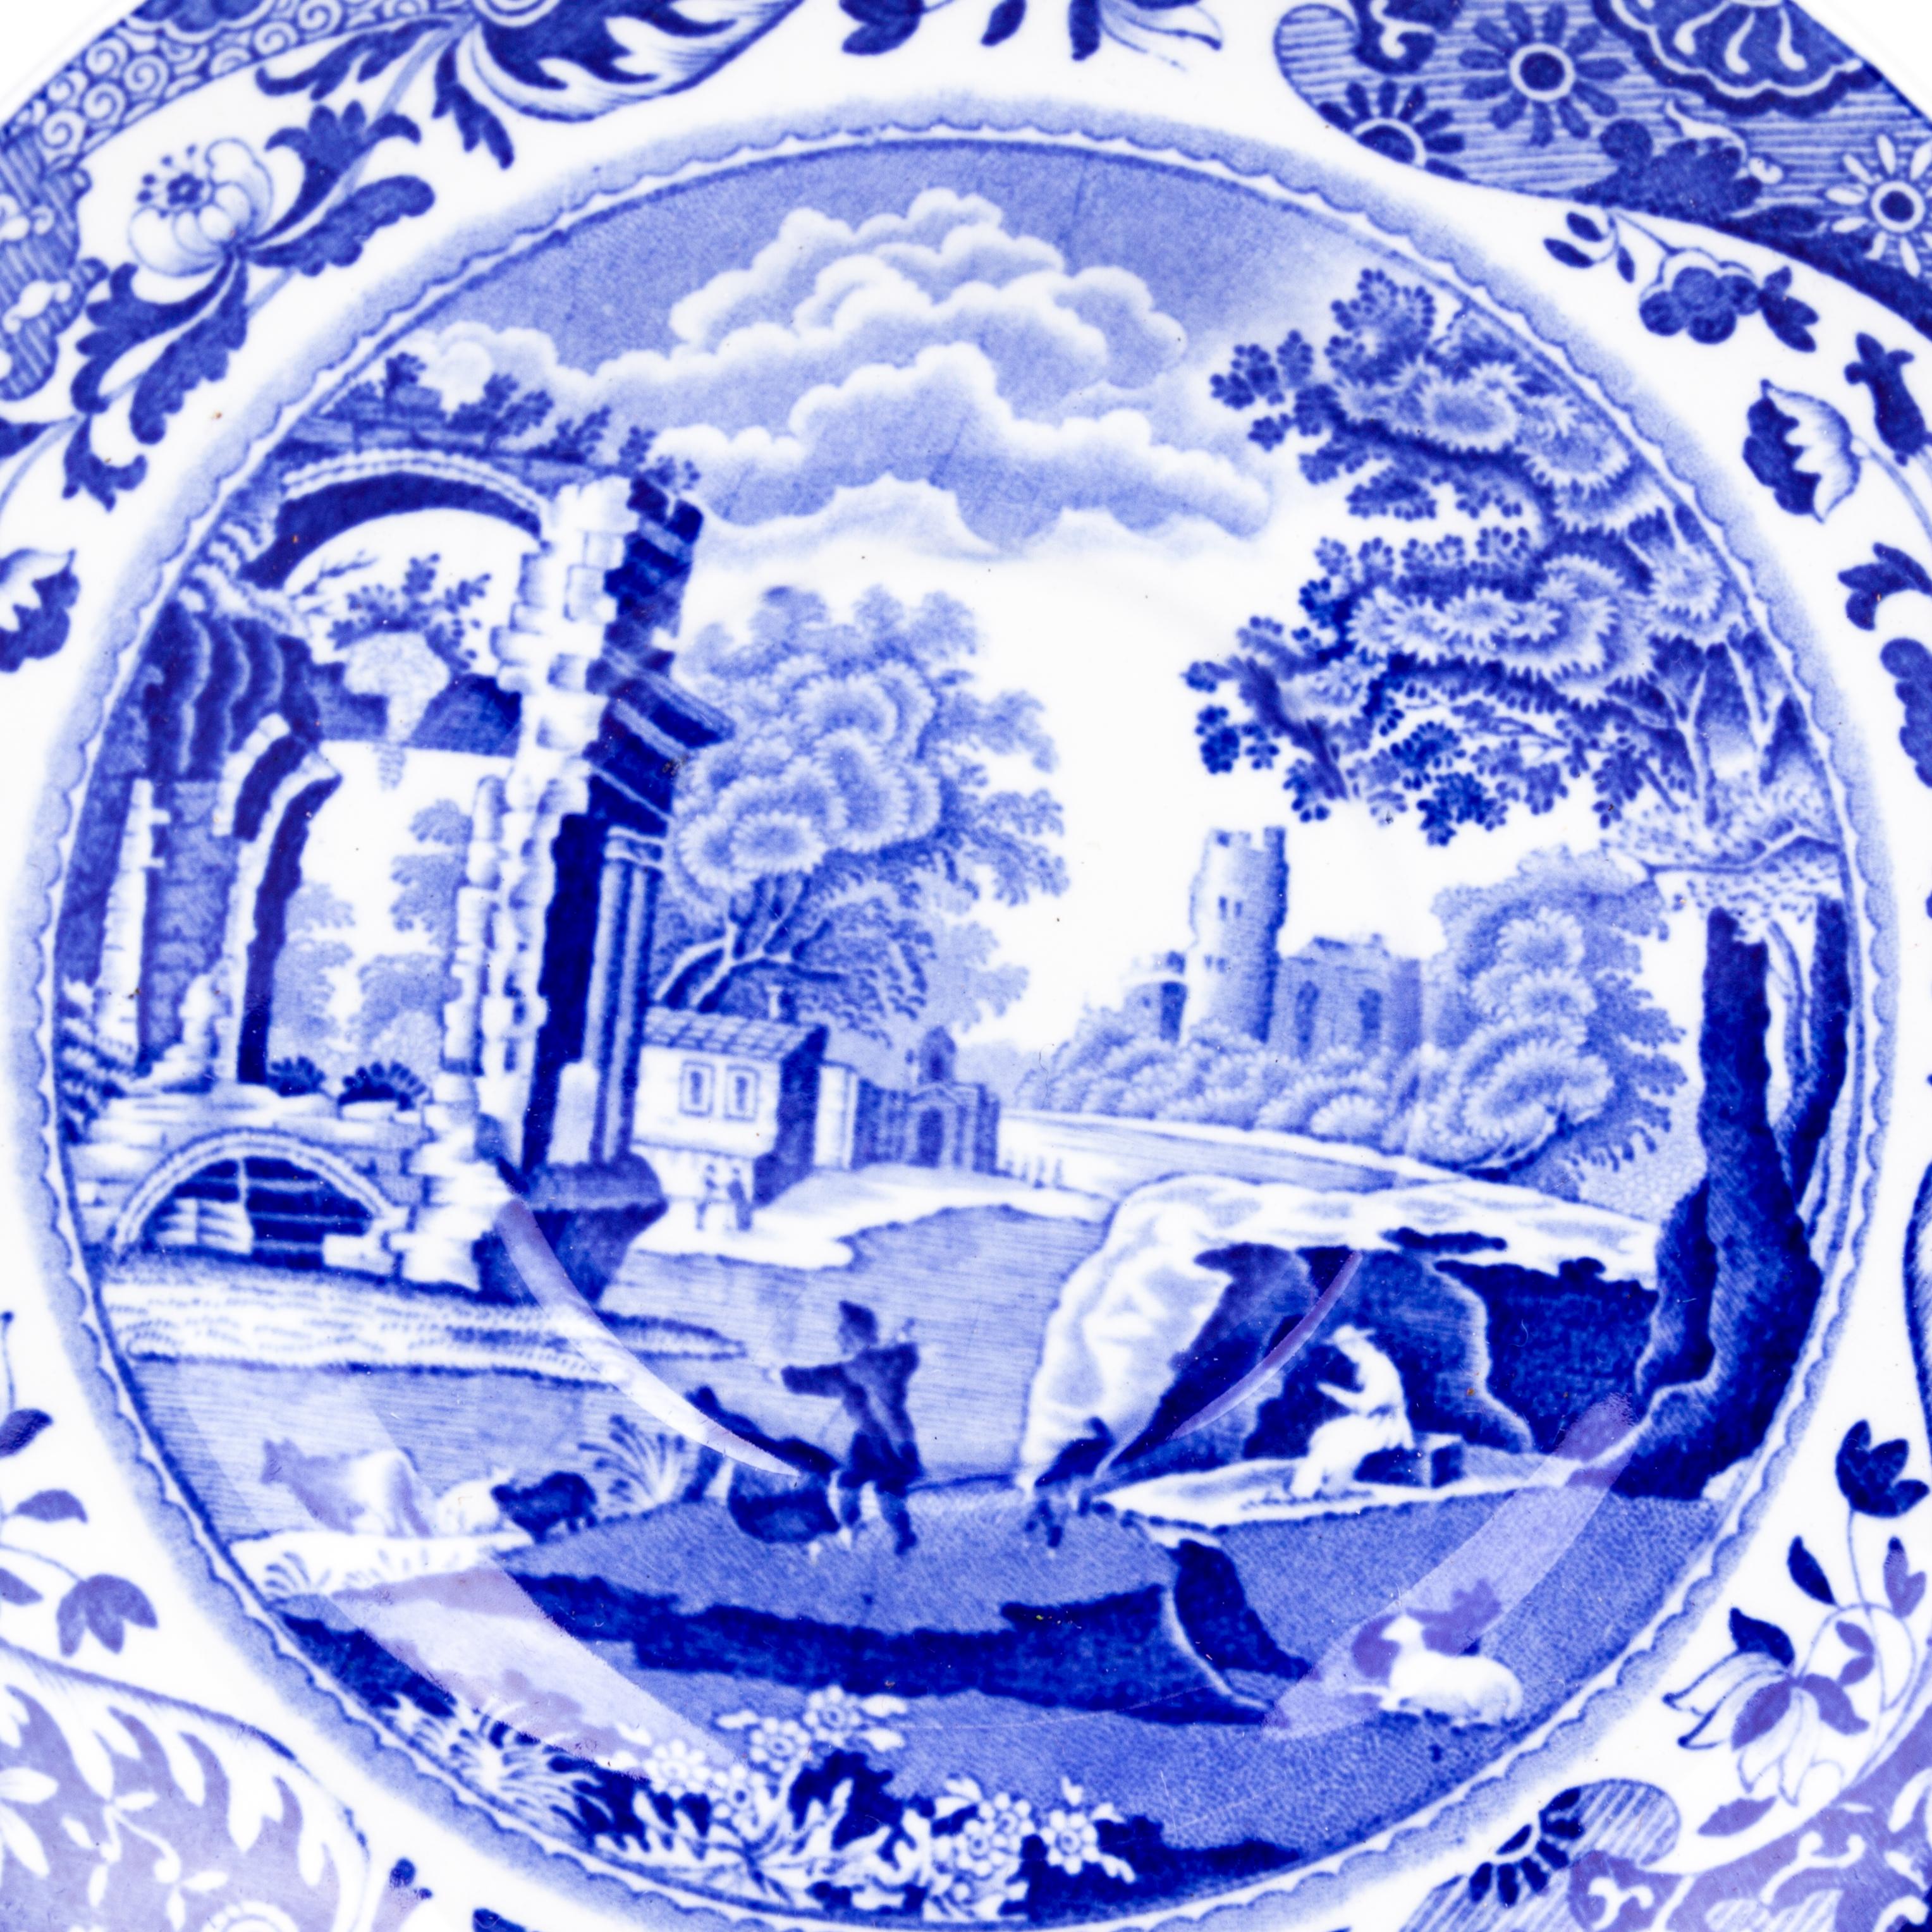 From a private collection.
Free international shipping.
Copeland Spode's Blue Italian Fine Porcelain Plate 